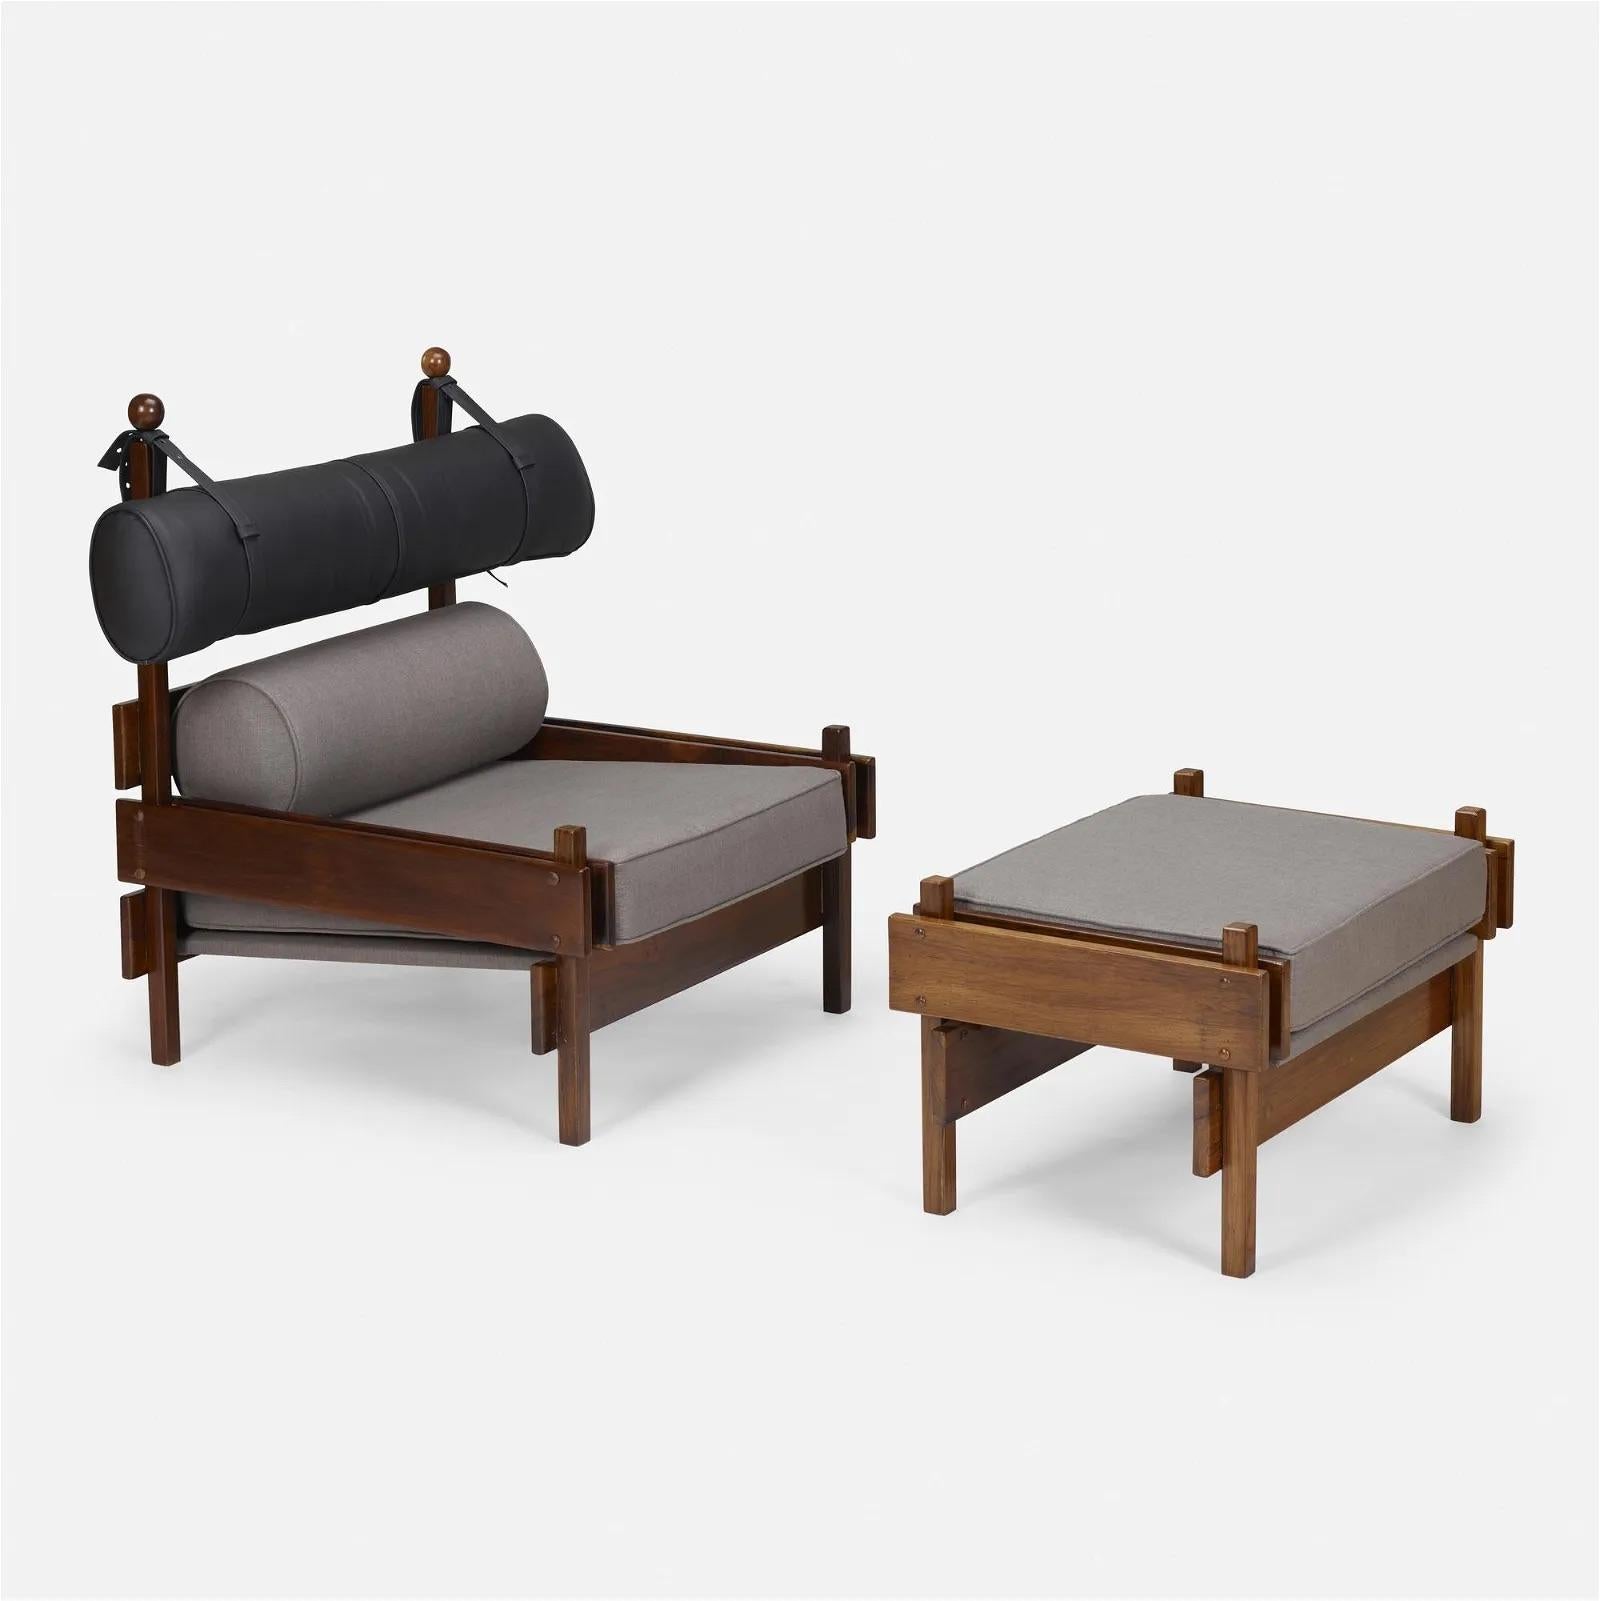 Sergio Rodrigues Tonico Lounge Chairs with Ottomans, 1960s Brazil For Sale 2